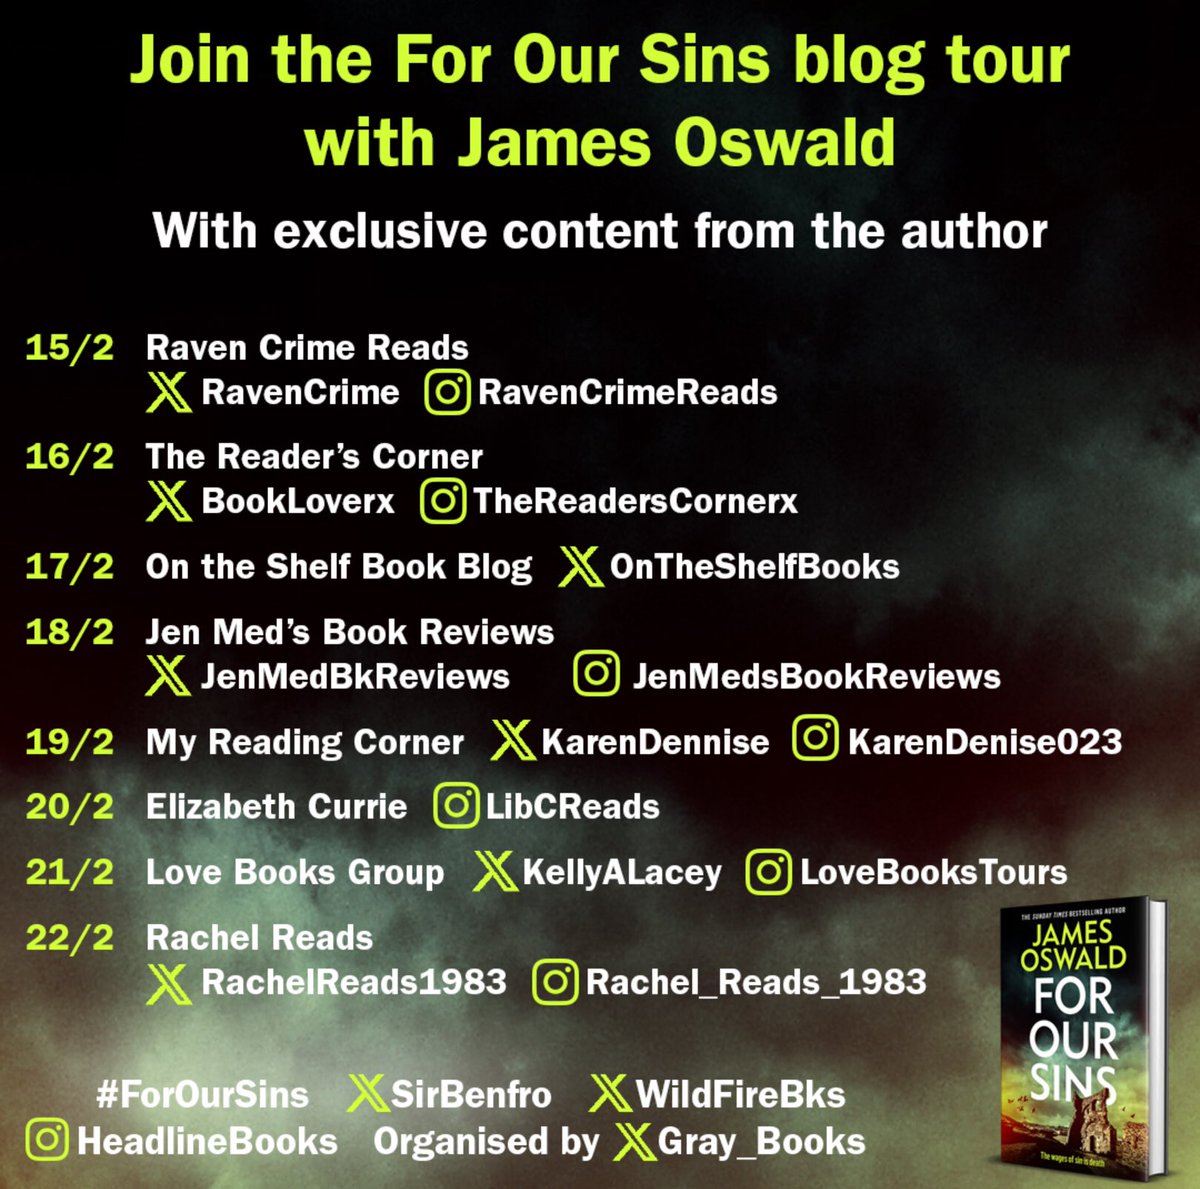 Absolute pleasure to be part of the #ForOurSins blog tour this weekend - it’s amazing to be part of the McLean story A must read for all lovers of Scottish Crime. Get your copy now! @SirBenfro @Wildfirebks @gray_books ontheshelfbookblog.wordpress.com/2024/02/17/for…